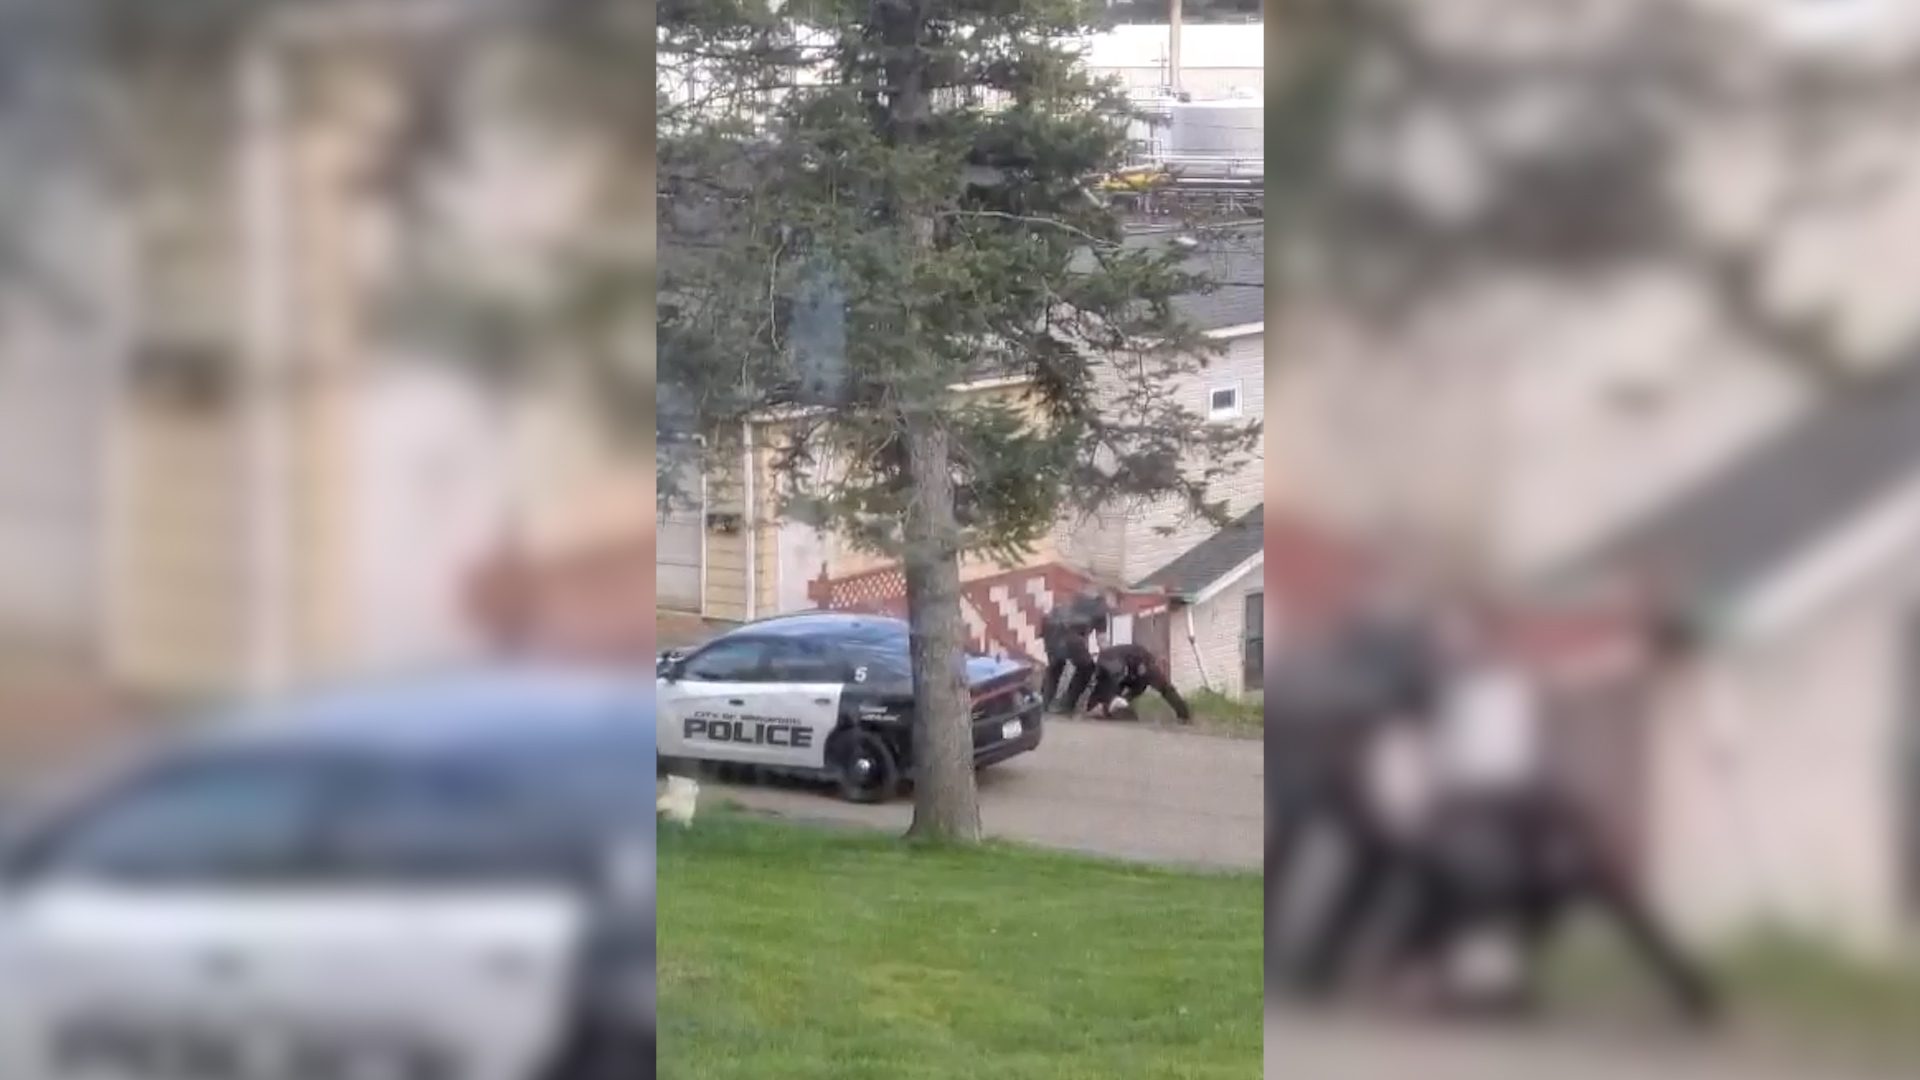 A video surfaced of Police Chief Hiel Bartlett and another officer, Patrolman Matthew Gustin, making an arrest in which some Bradford, Pa. residents say they used excessive force.